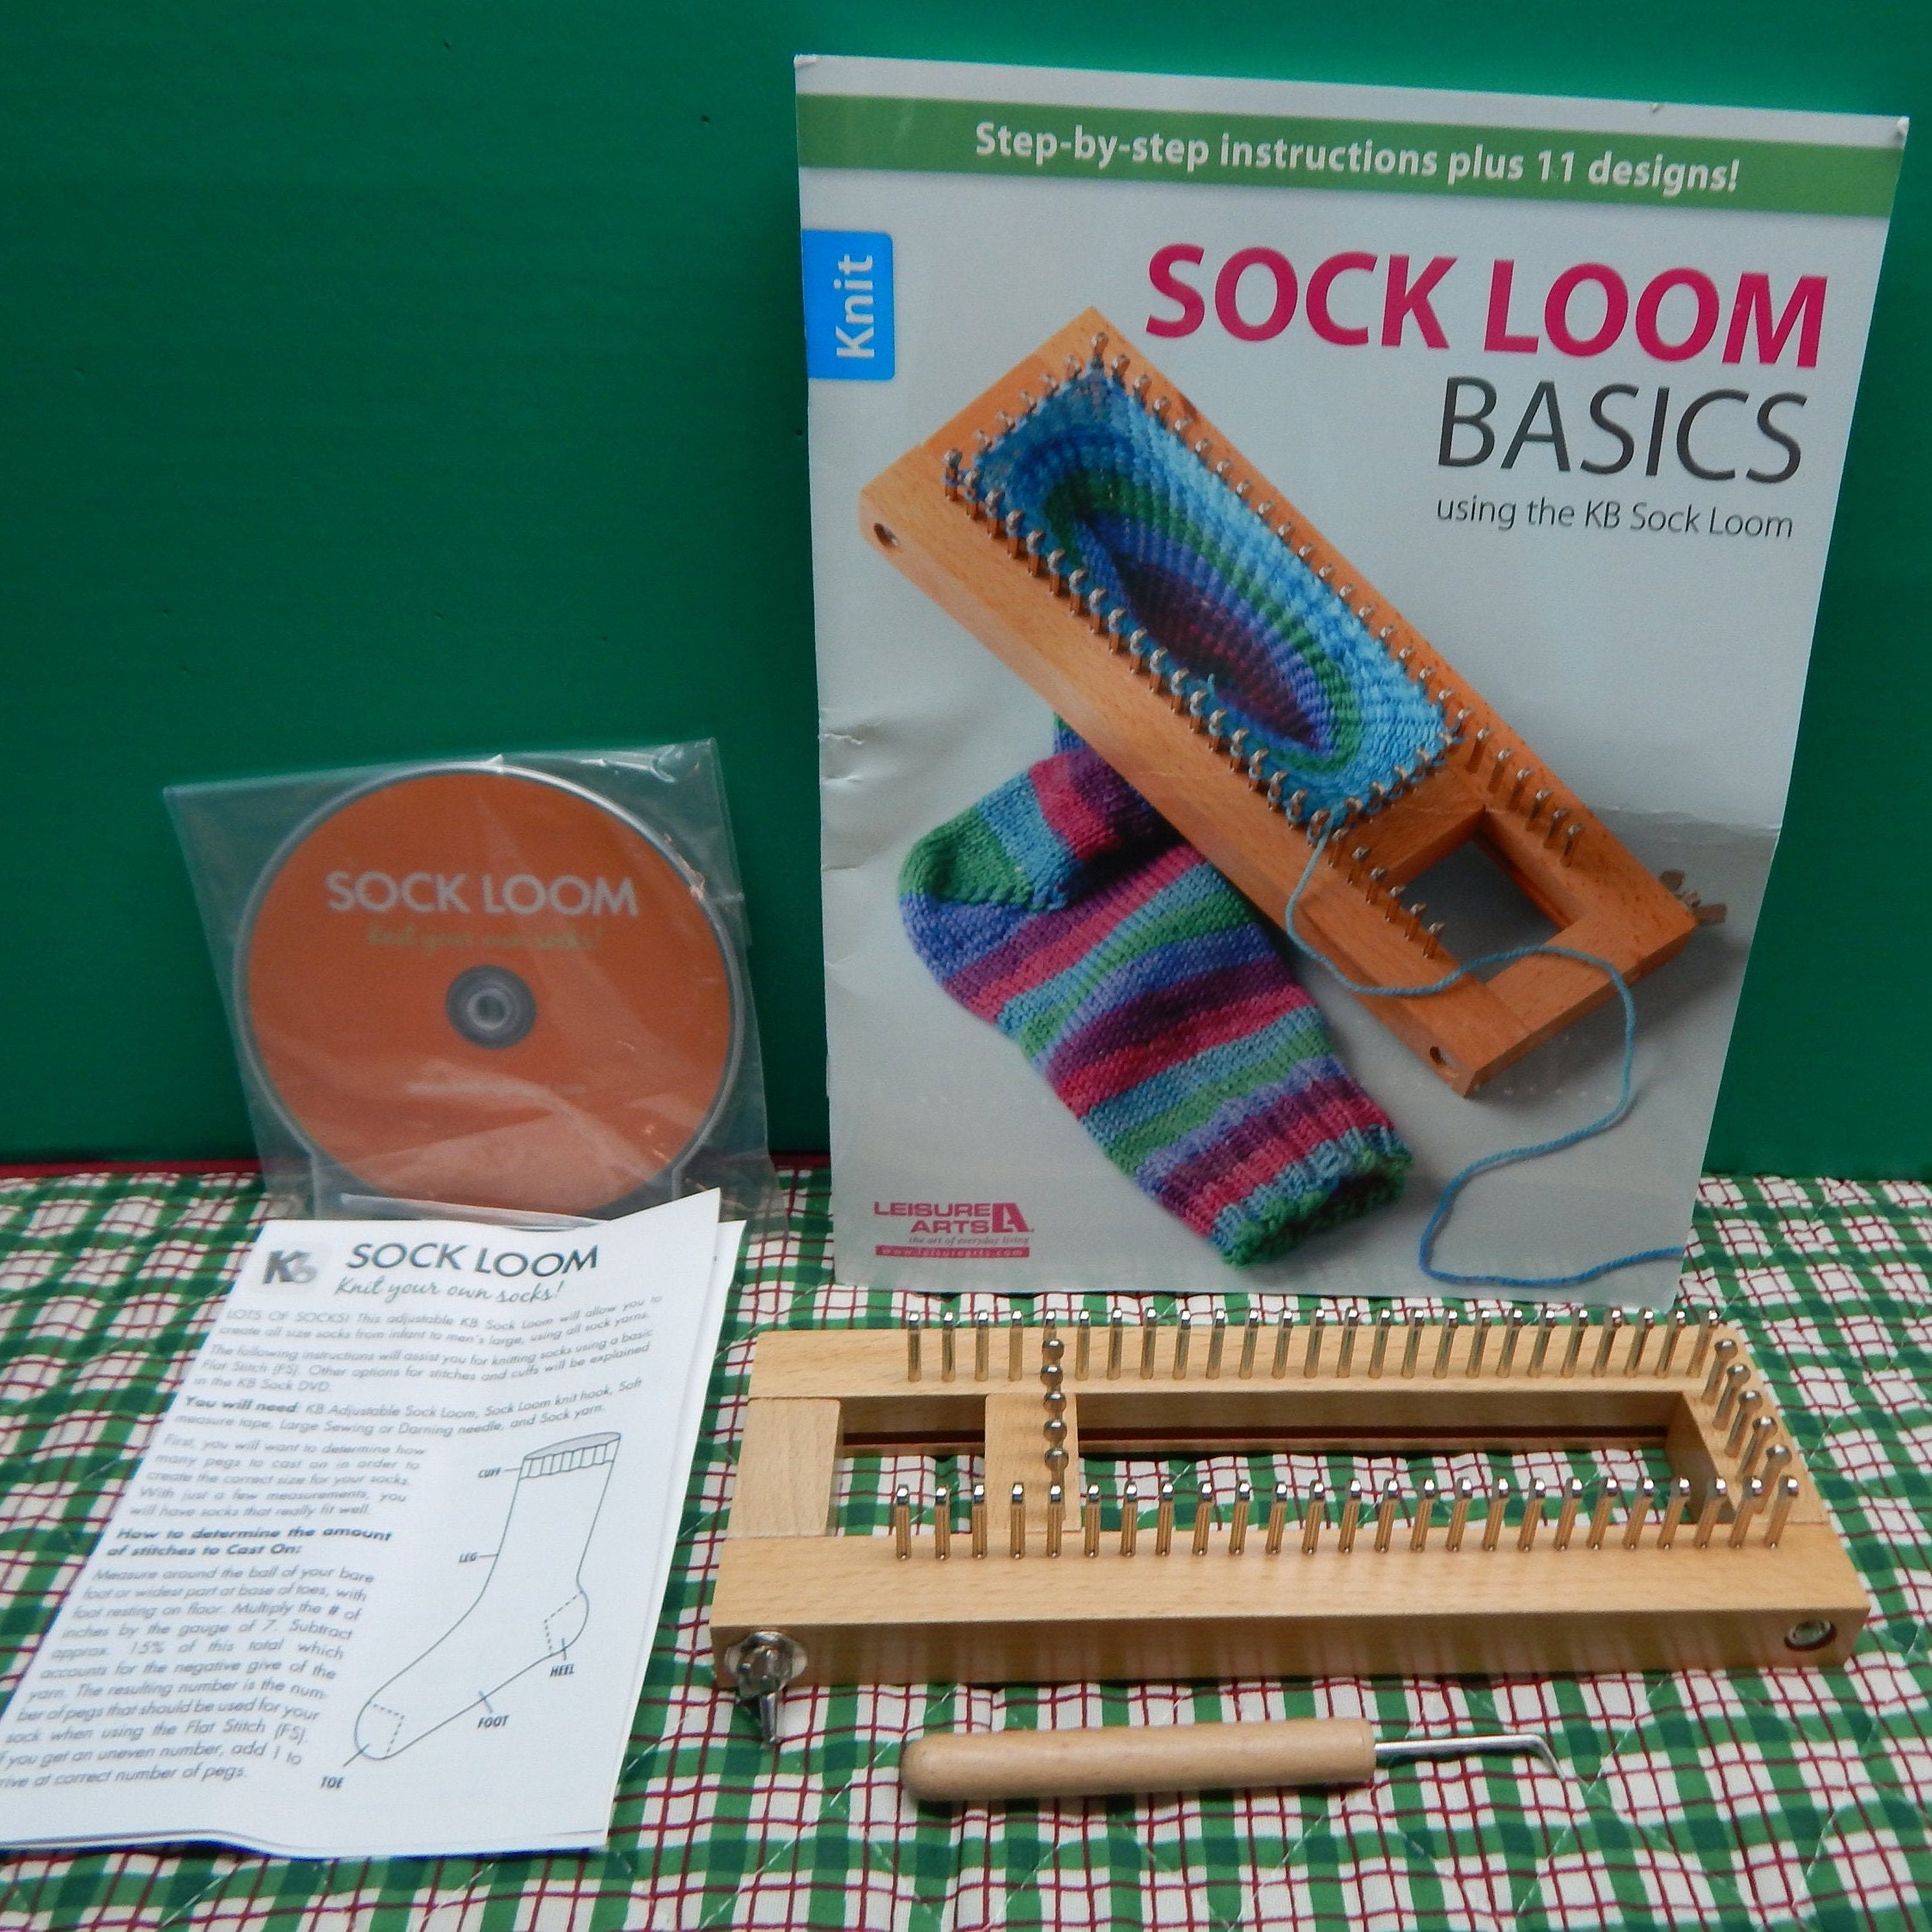 ROUND LOOM KNITTING DVD - Learn HOW TO KNIT - NEW